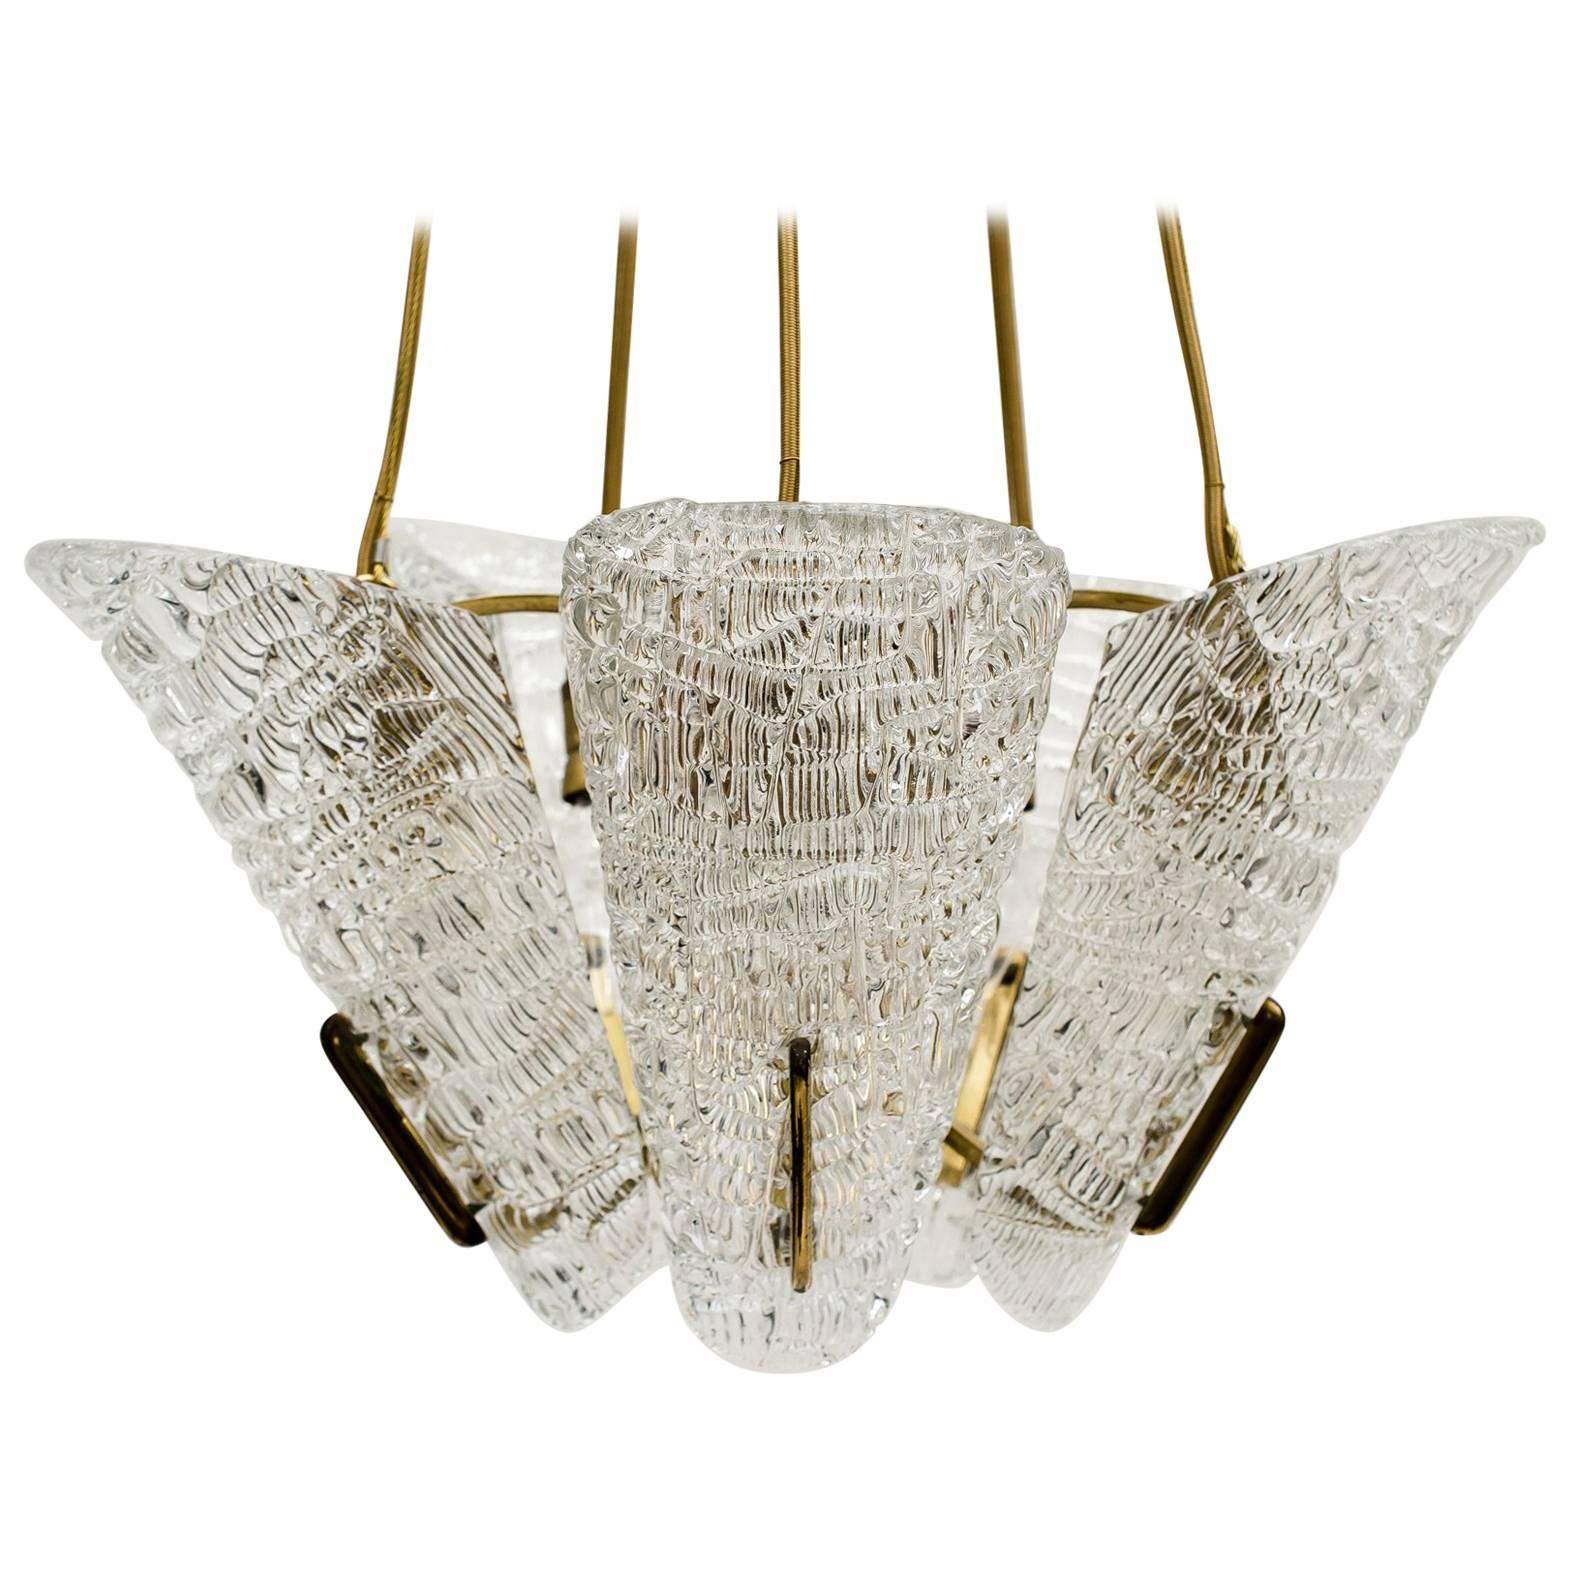 Beautiful Klamar Chandelier with Textured Glass, circa 1950s For Sale